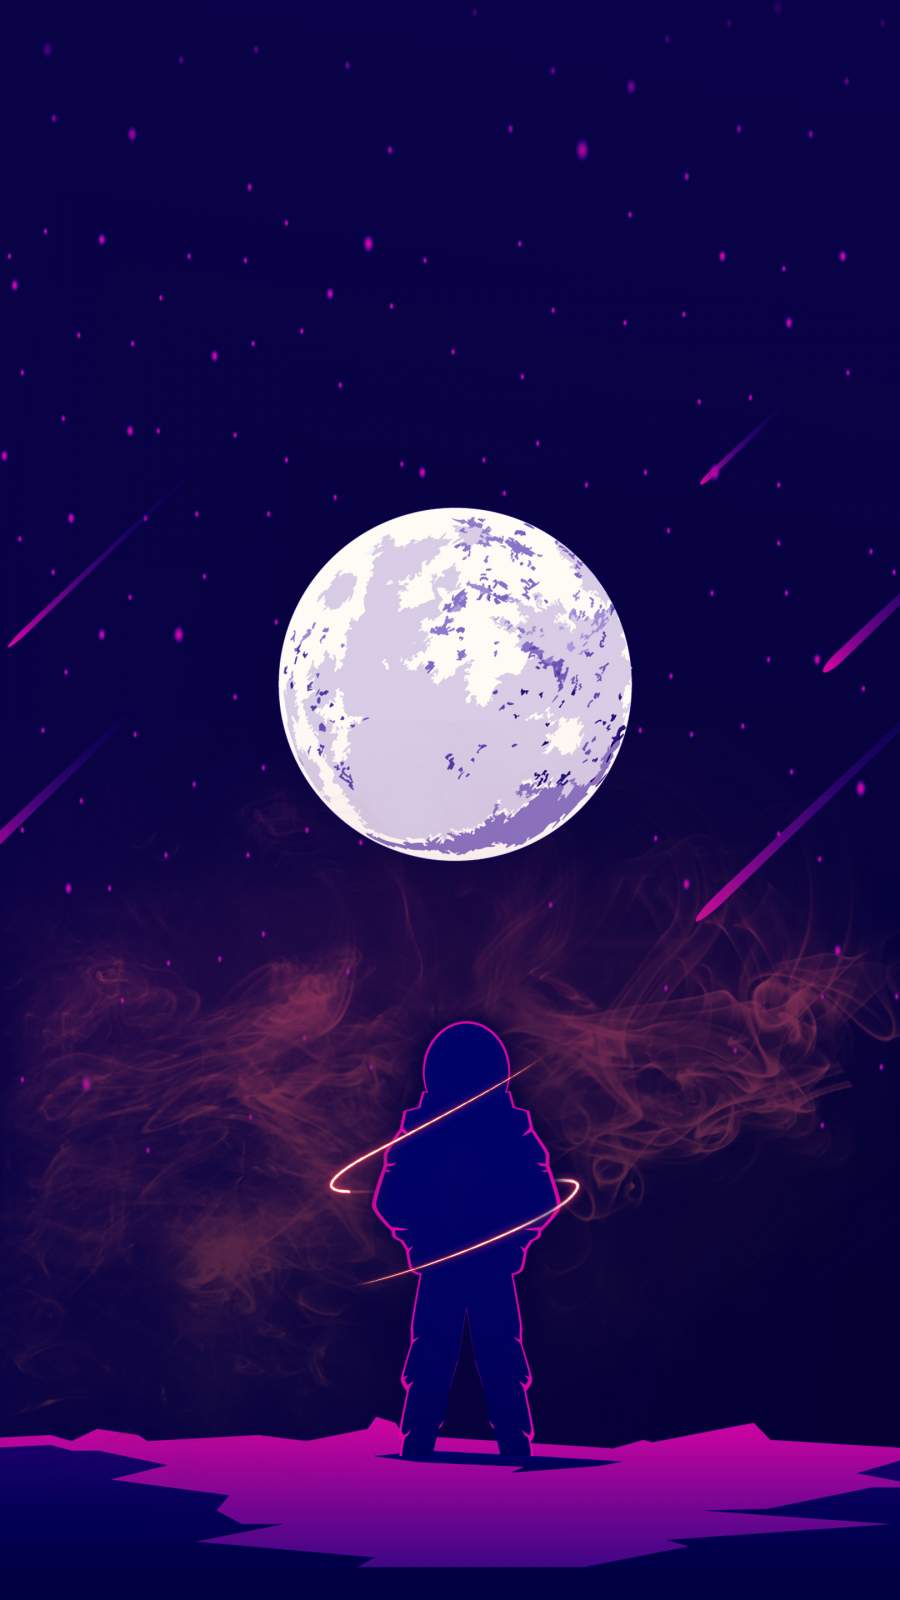 Space Alone IPhone Wallpaper - IPhone Wallpapers : iPhone Wallpapers